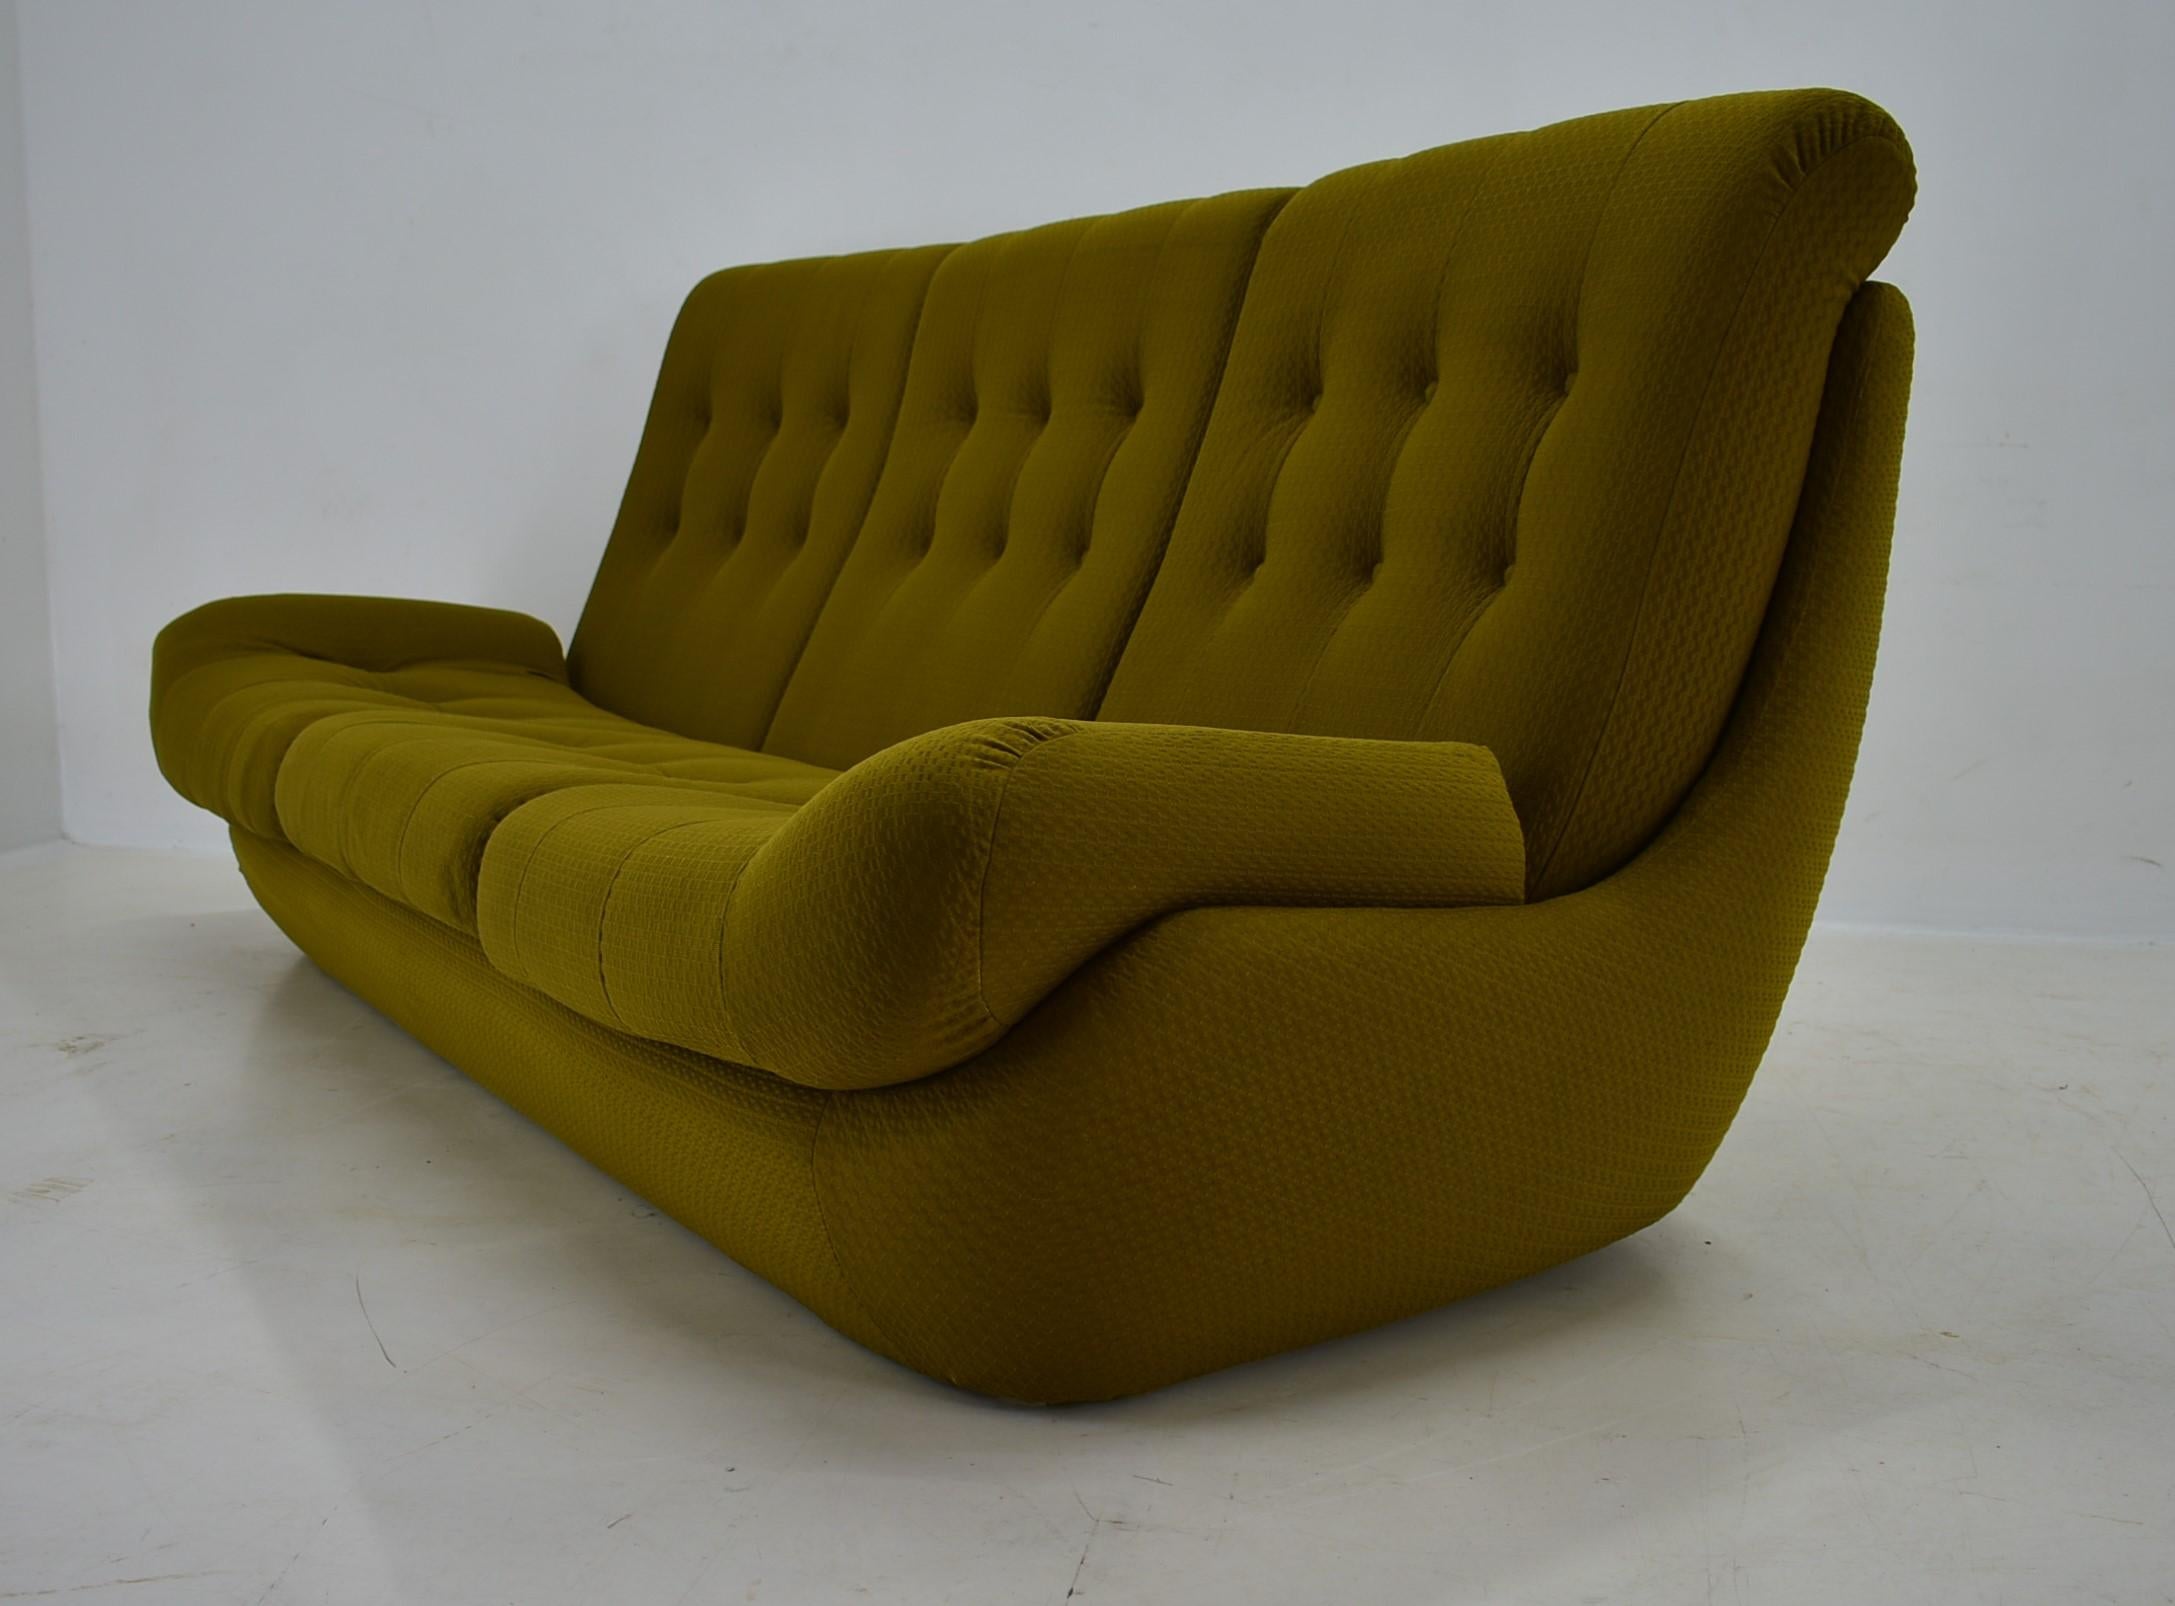 Atlantis sofa from the 1960s, produced in Czech Republic - at the moment they are unique. Due to their dimensions, they perfectly blend in even in small apartments .   Space-saving piece of furniture. We can prepare this sofa with two armchairs as a